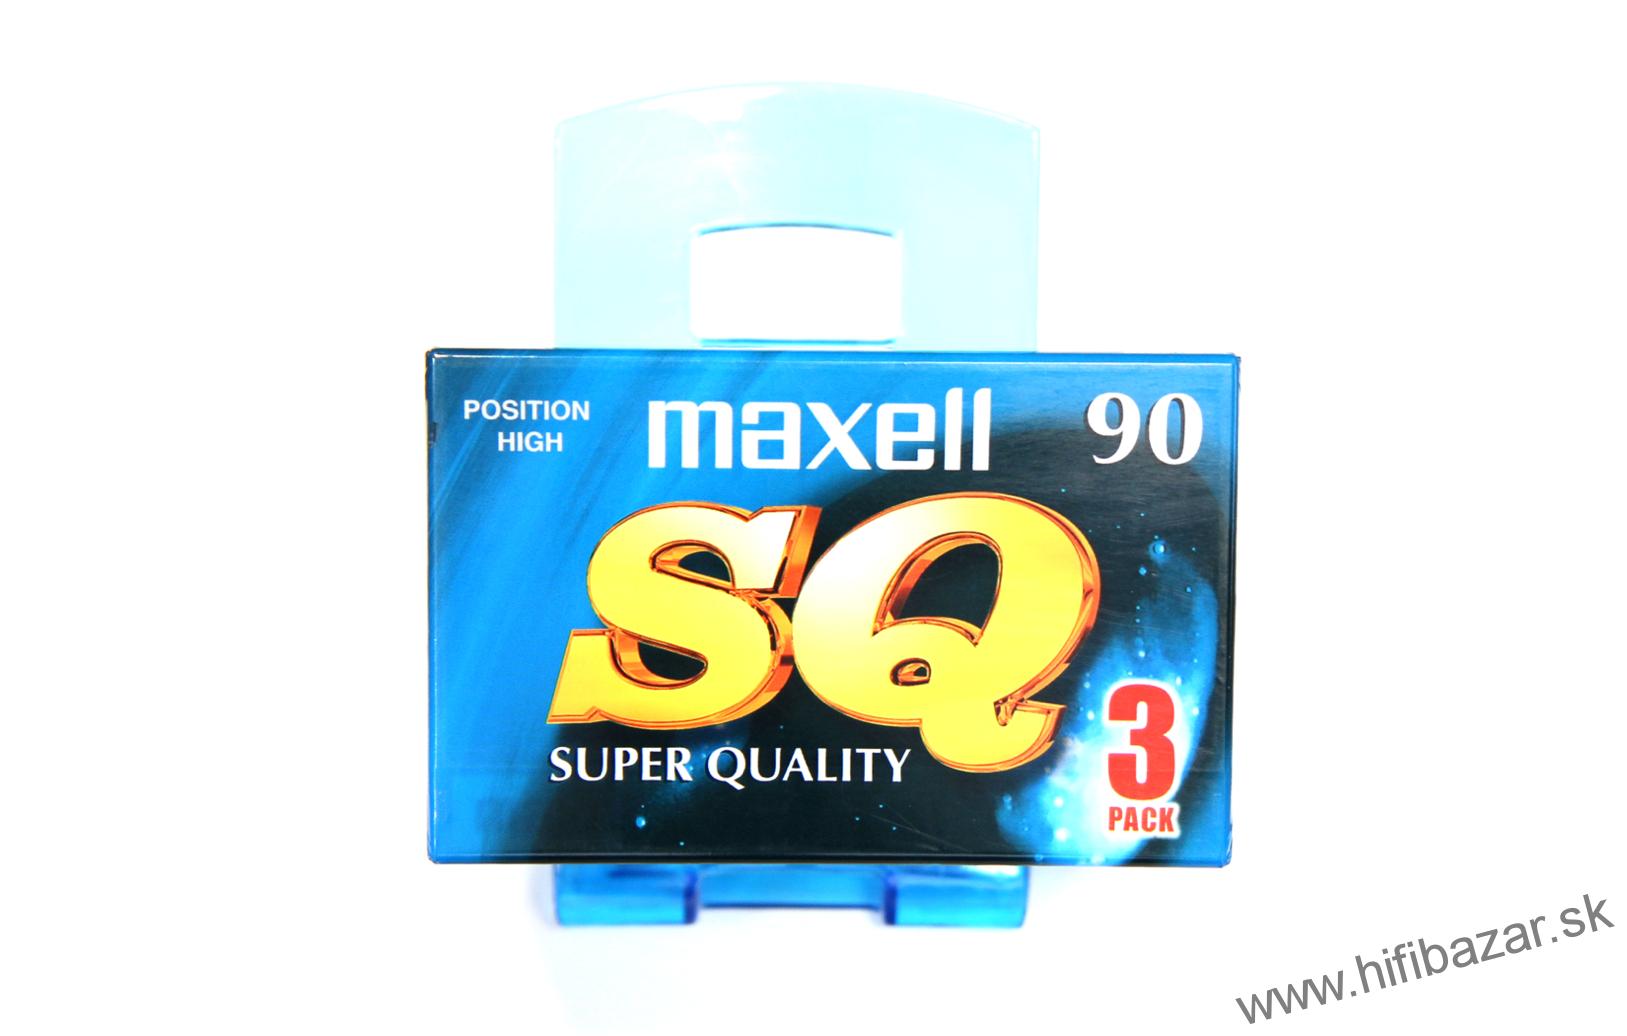 MAXELL SQ-90 Position Chrome 3PACK